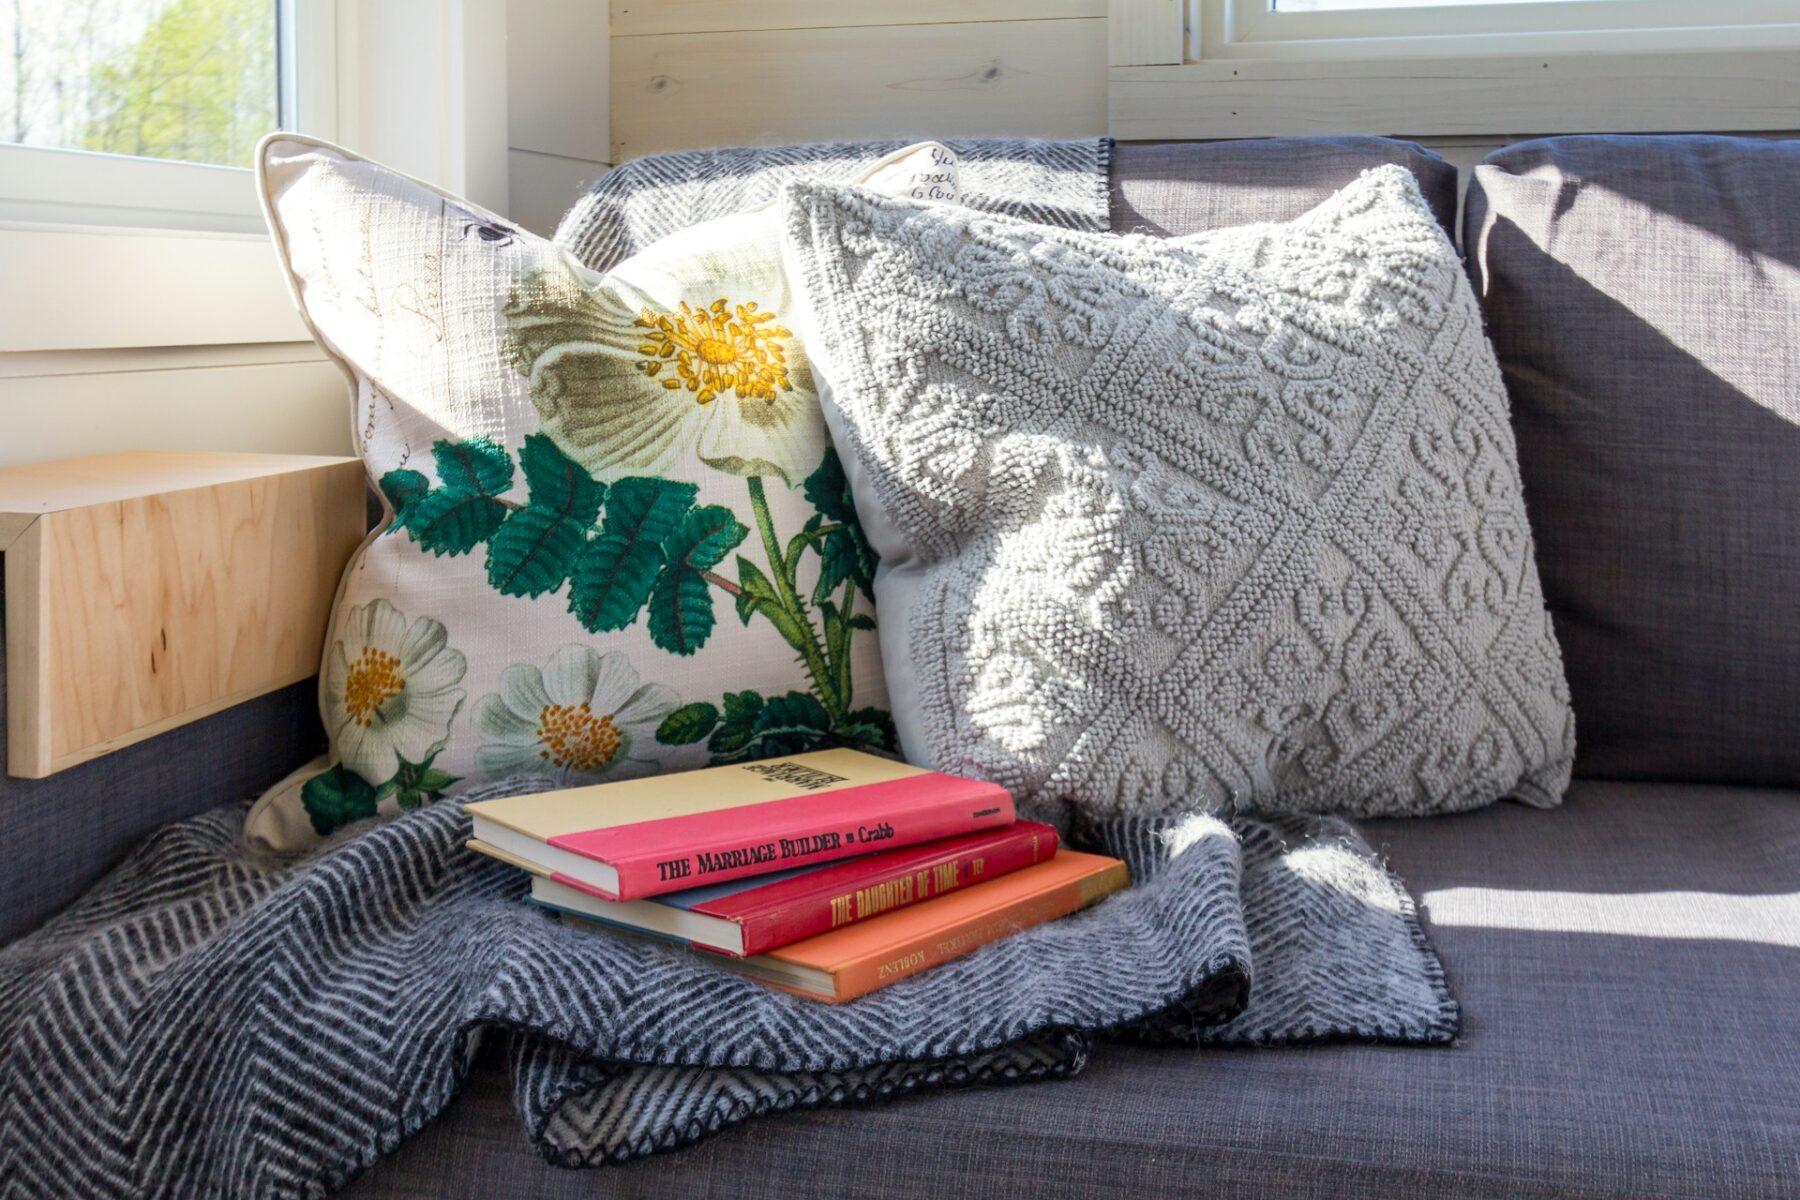 image of a comfy reading nook with pillows and books and sunlight coming in